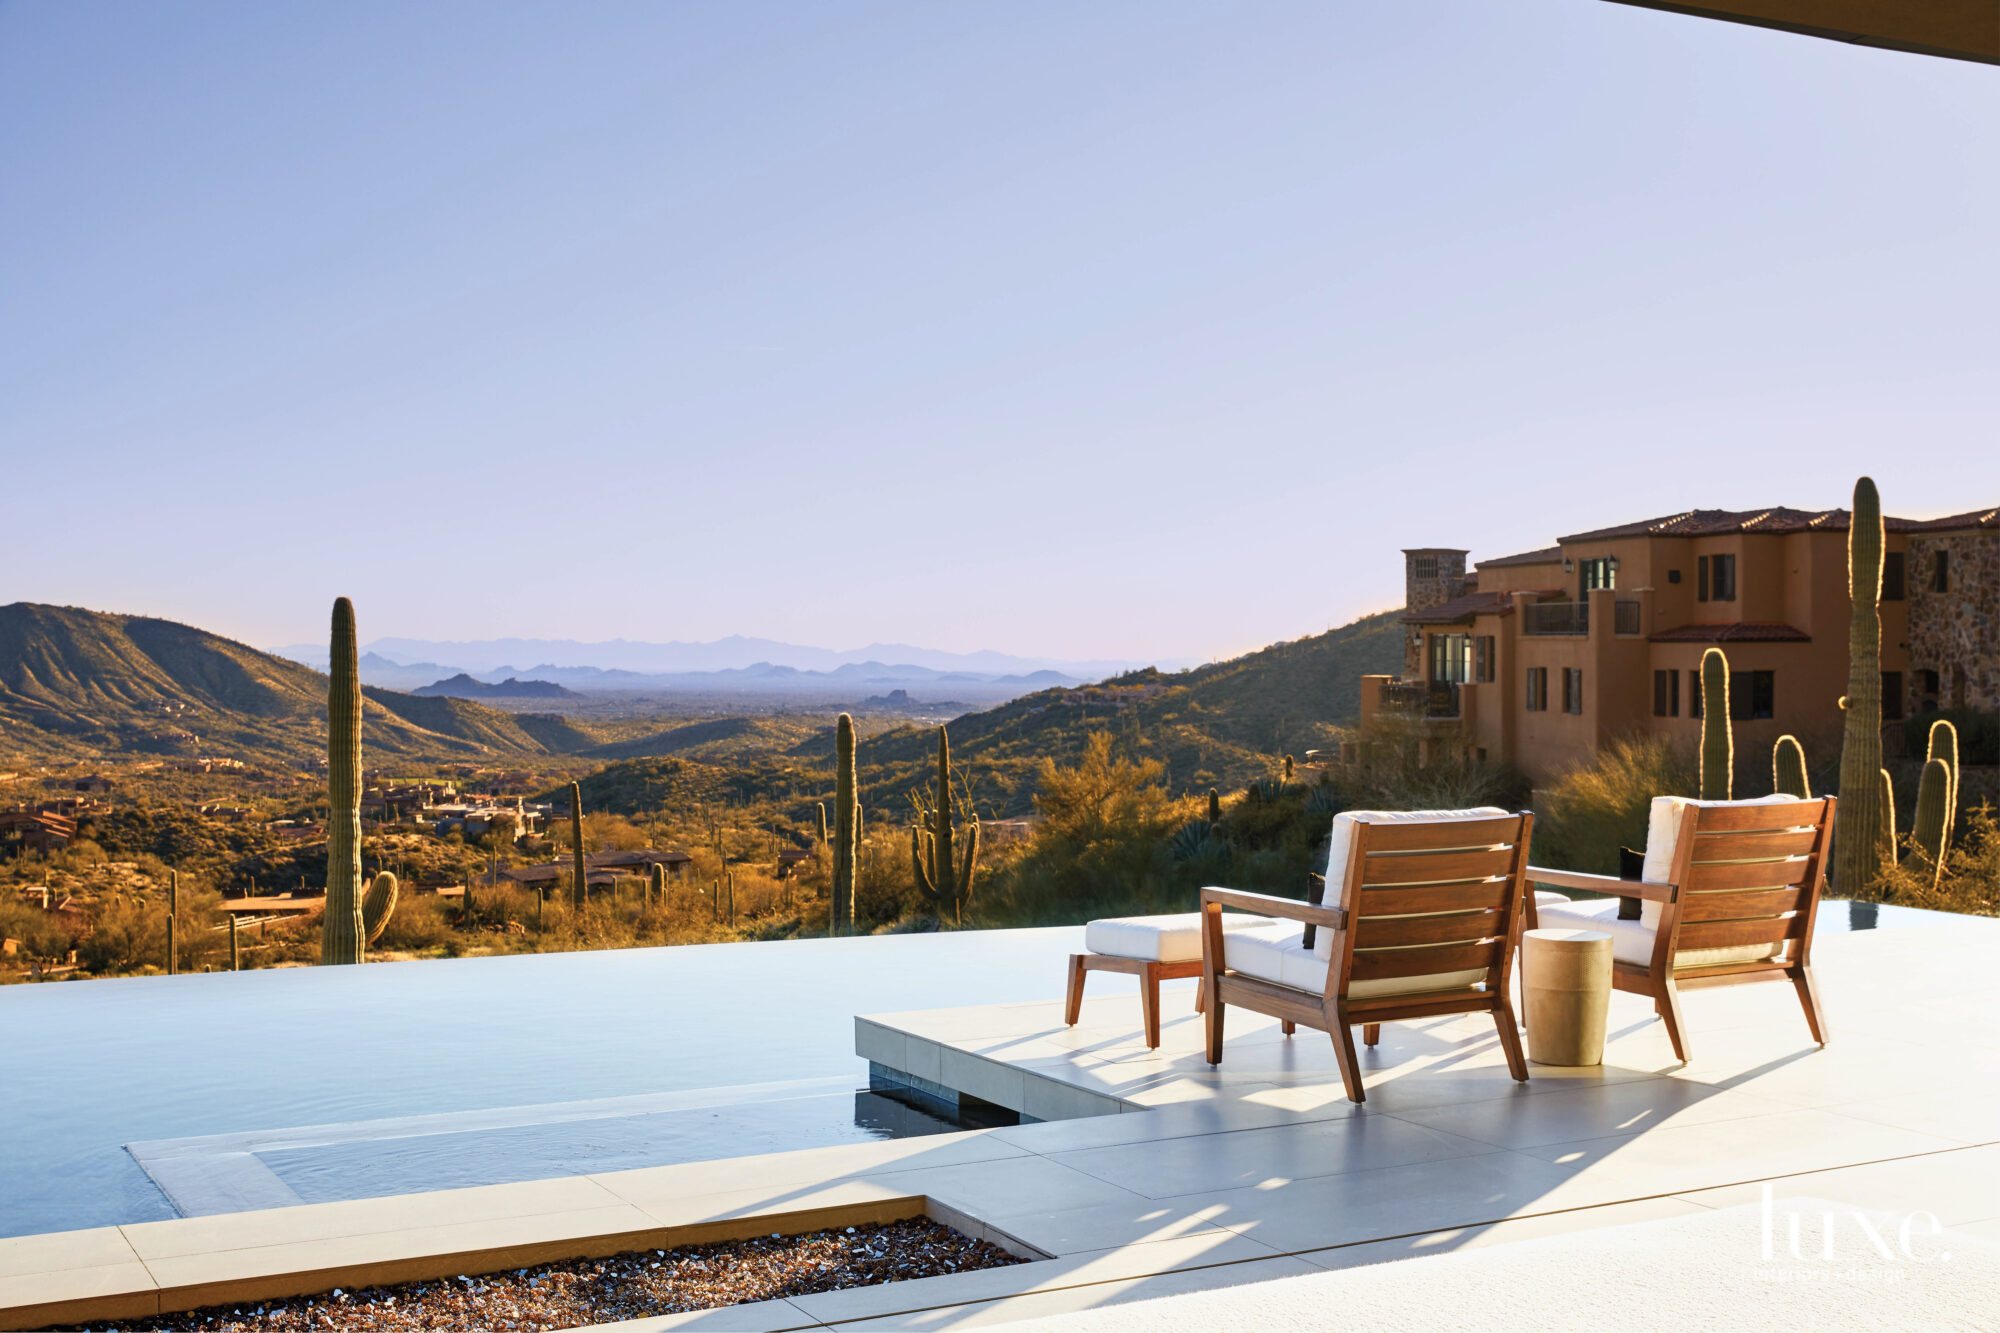 The view from the patio that overlooks an infinity pool and the mountains.